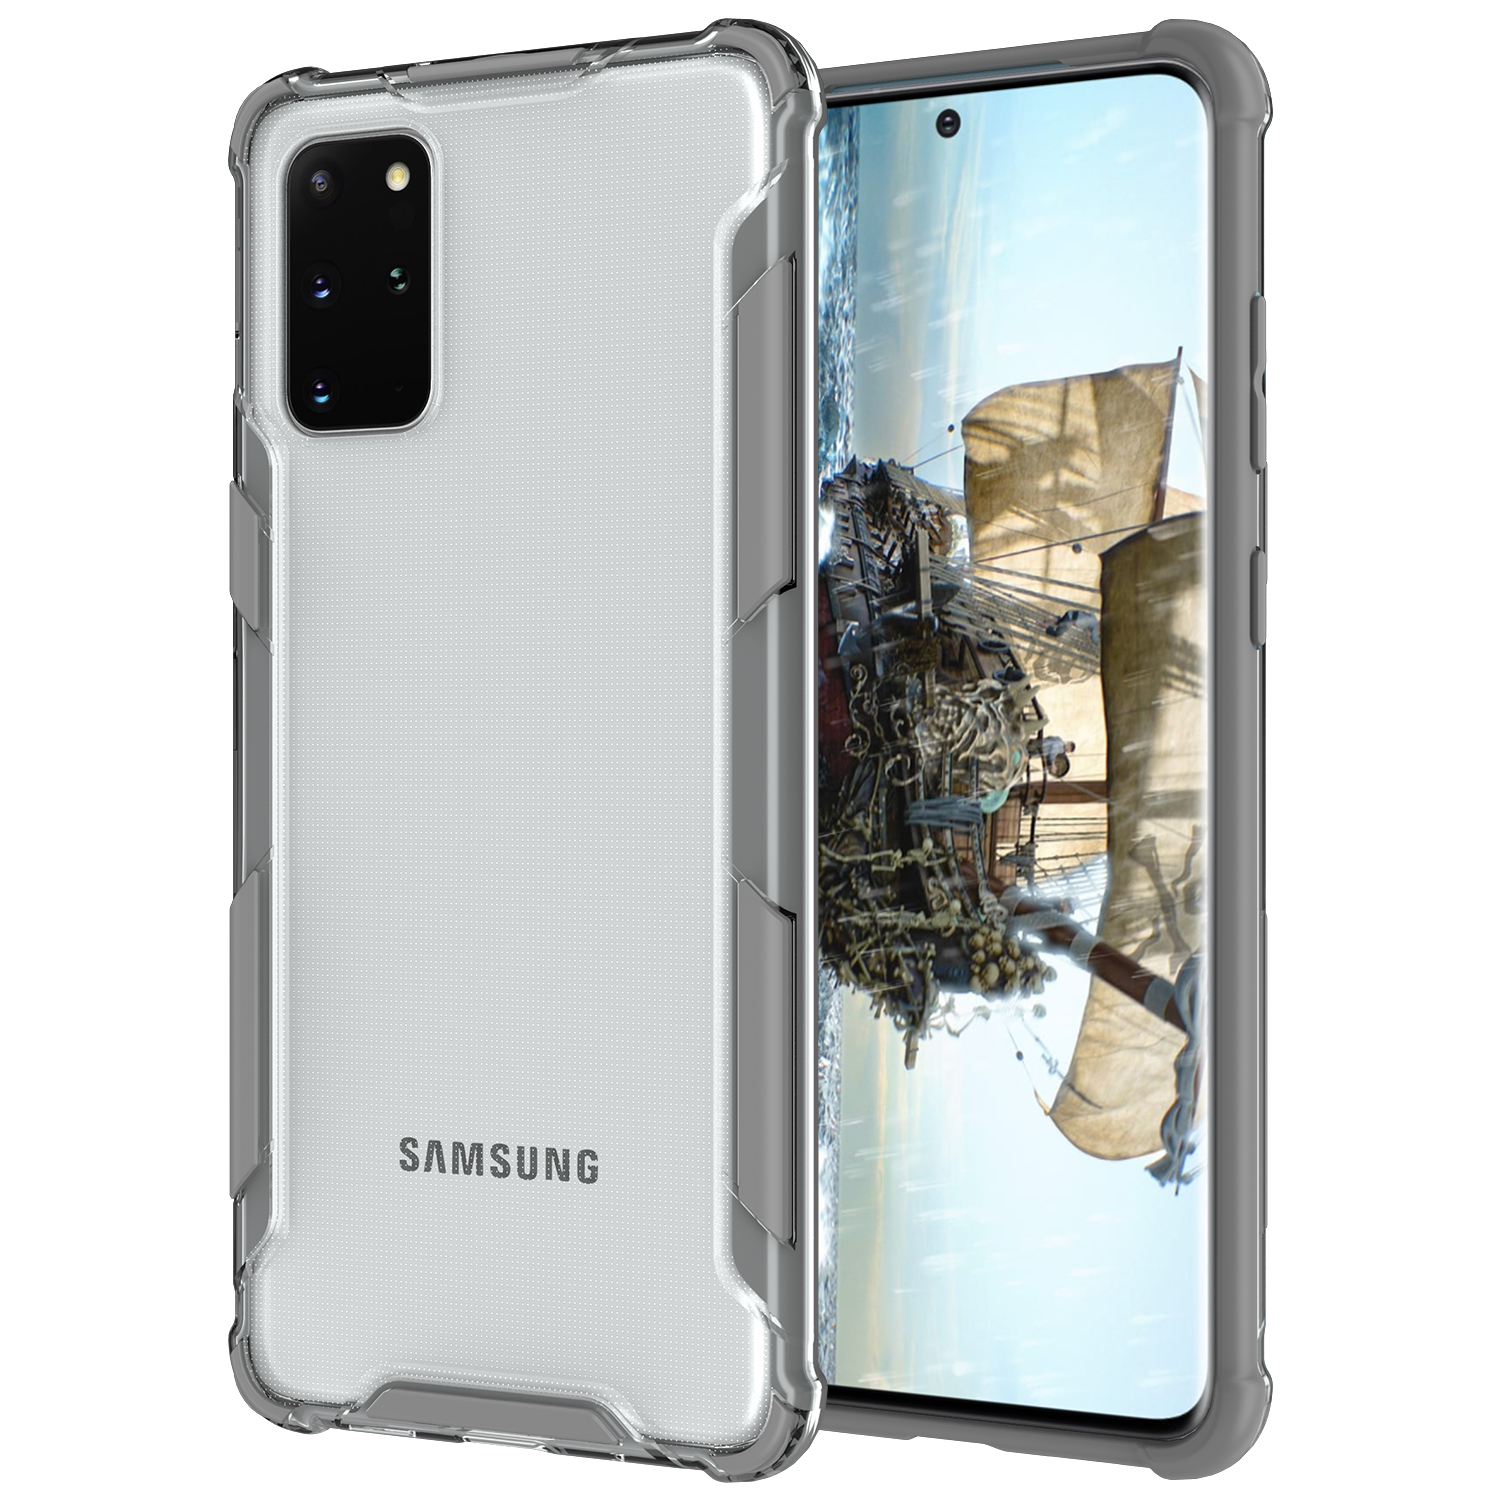 Shockproof Clear Phone Casing Xiaomi Redmi Note 9s/ Note 9 Pro Max/Note 9 Pro/Note 9/Redmi 10X /Redmi Note 8 Pro /Redmi Note 8T 7 7S Pro 9 Prime 9i 9C 9A POCO X3 NFC M3 Case Cover Protective Cover Airbag Bumper Transparent Covers Cases